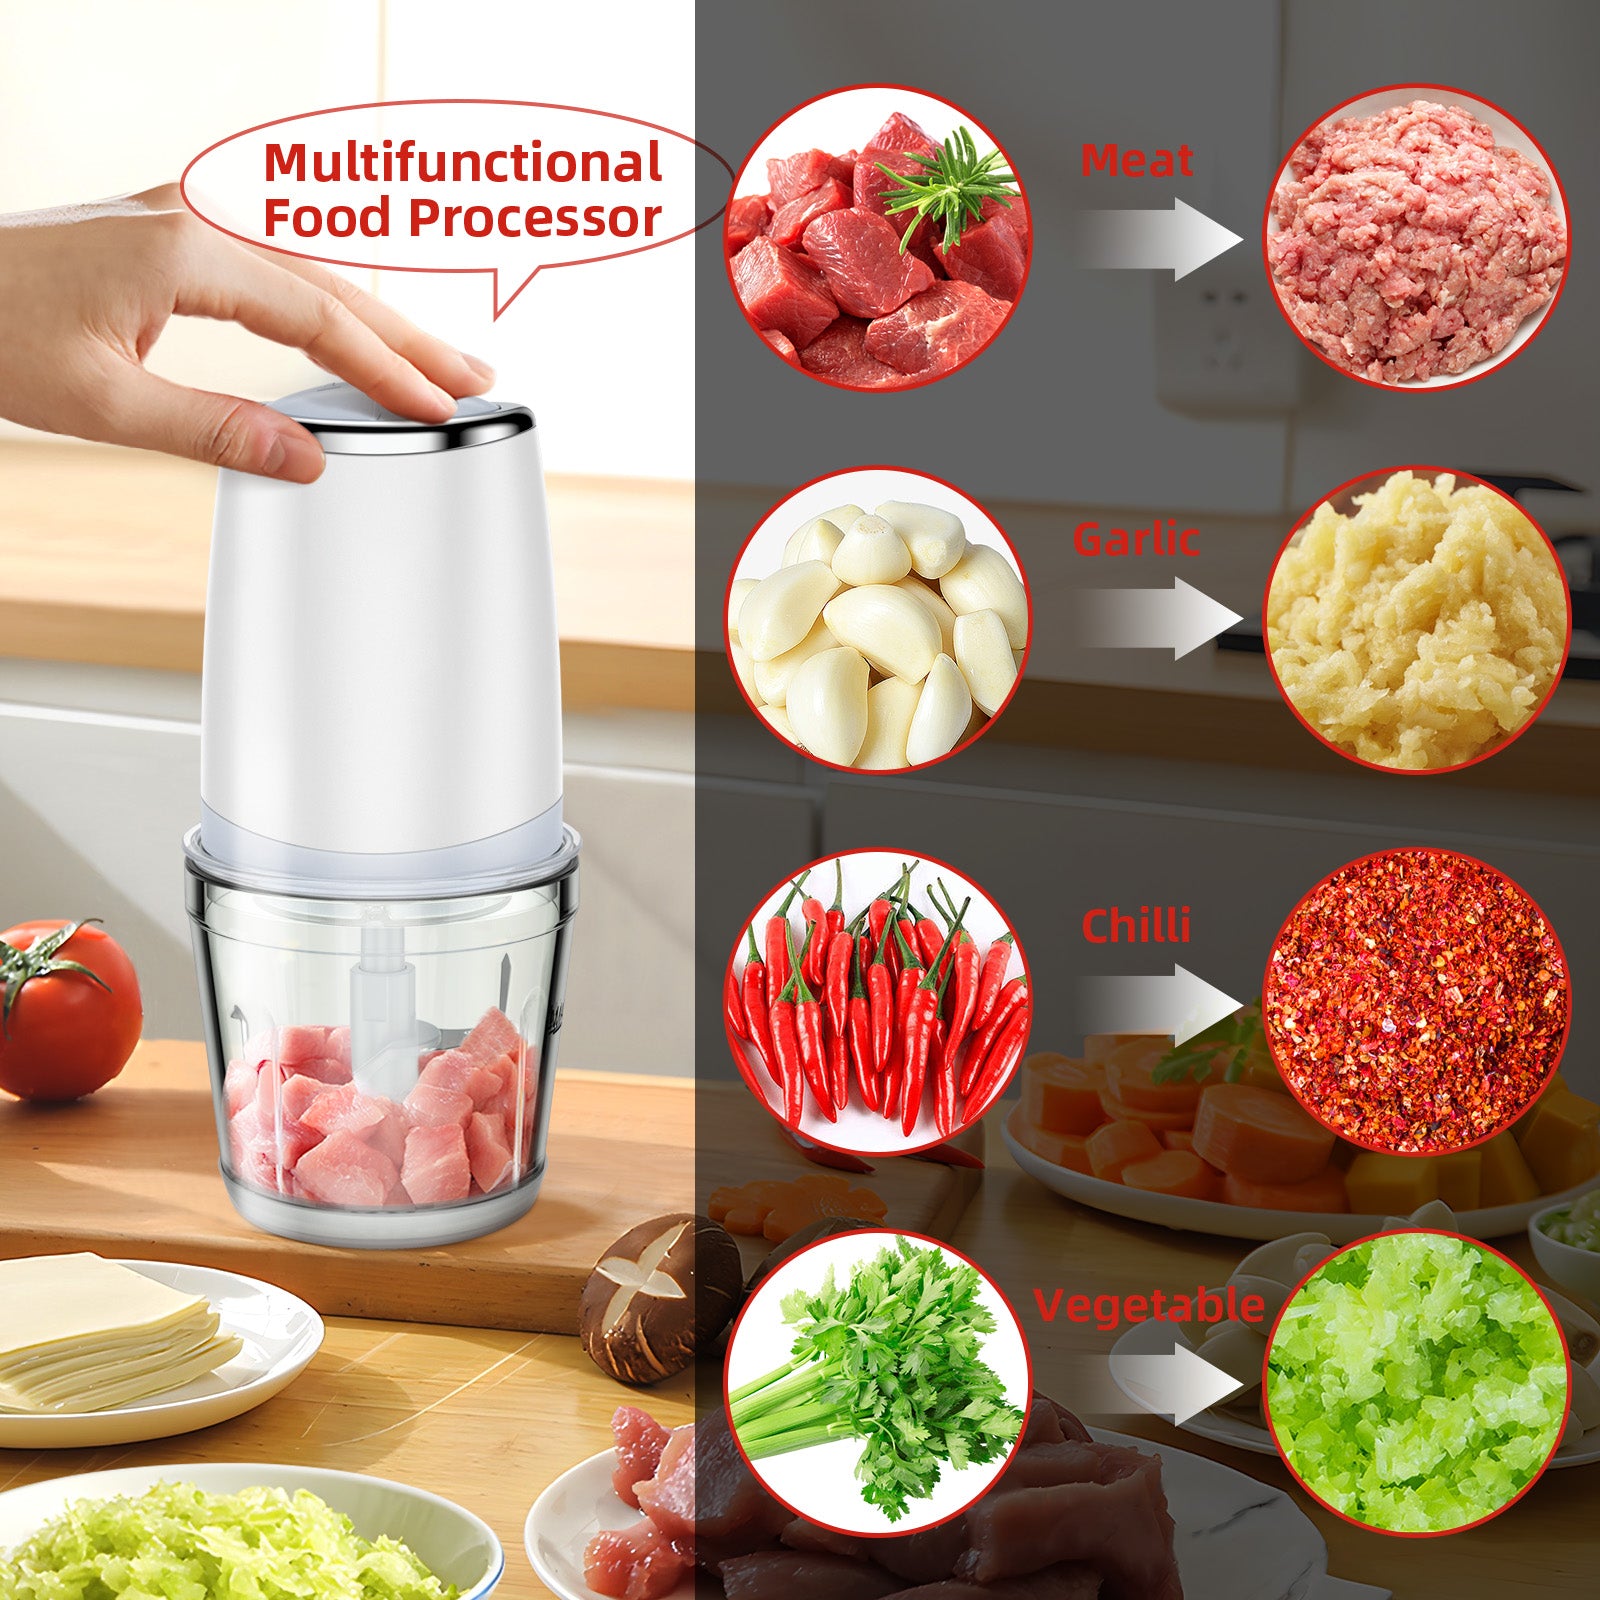 5000RPM Compact Food Processor, 300W, 2.5 Cup Glass Bowl, Electric Chopper, 4-Wing Stainless Steel Blades